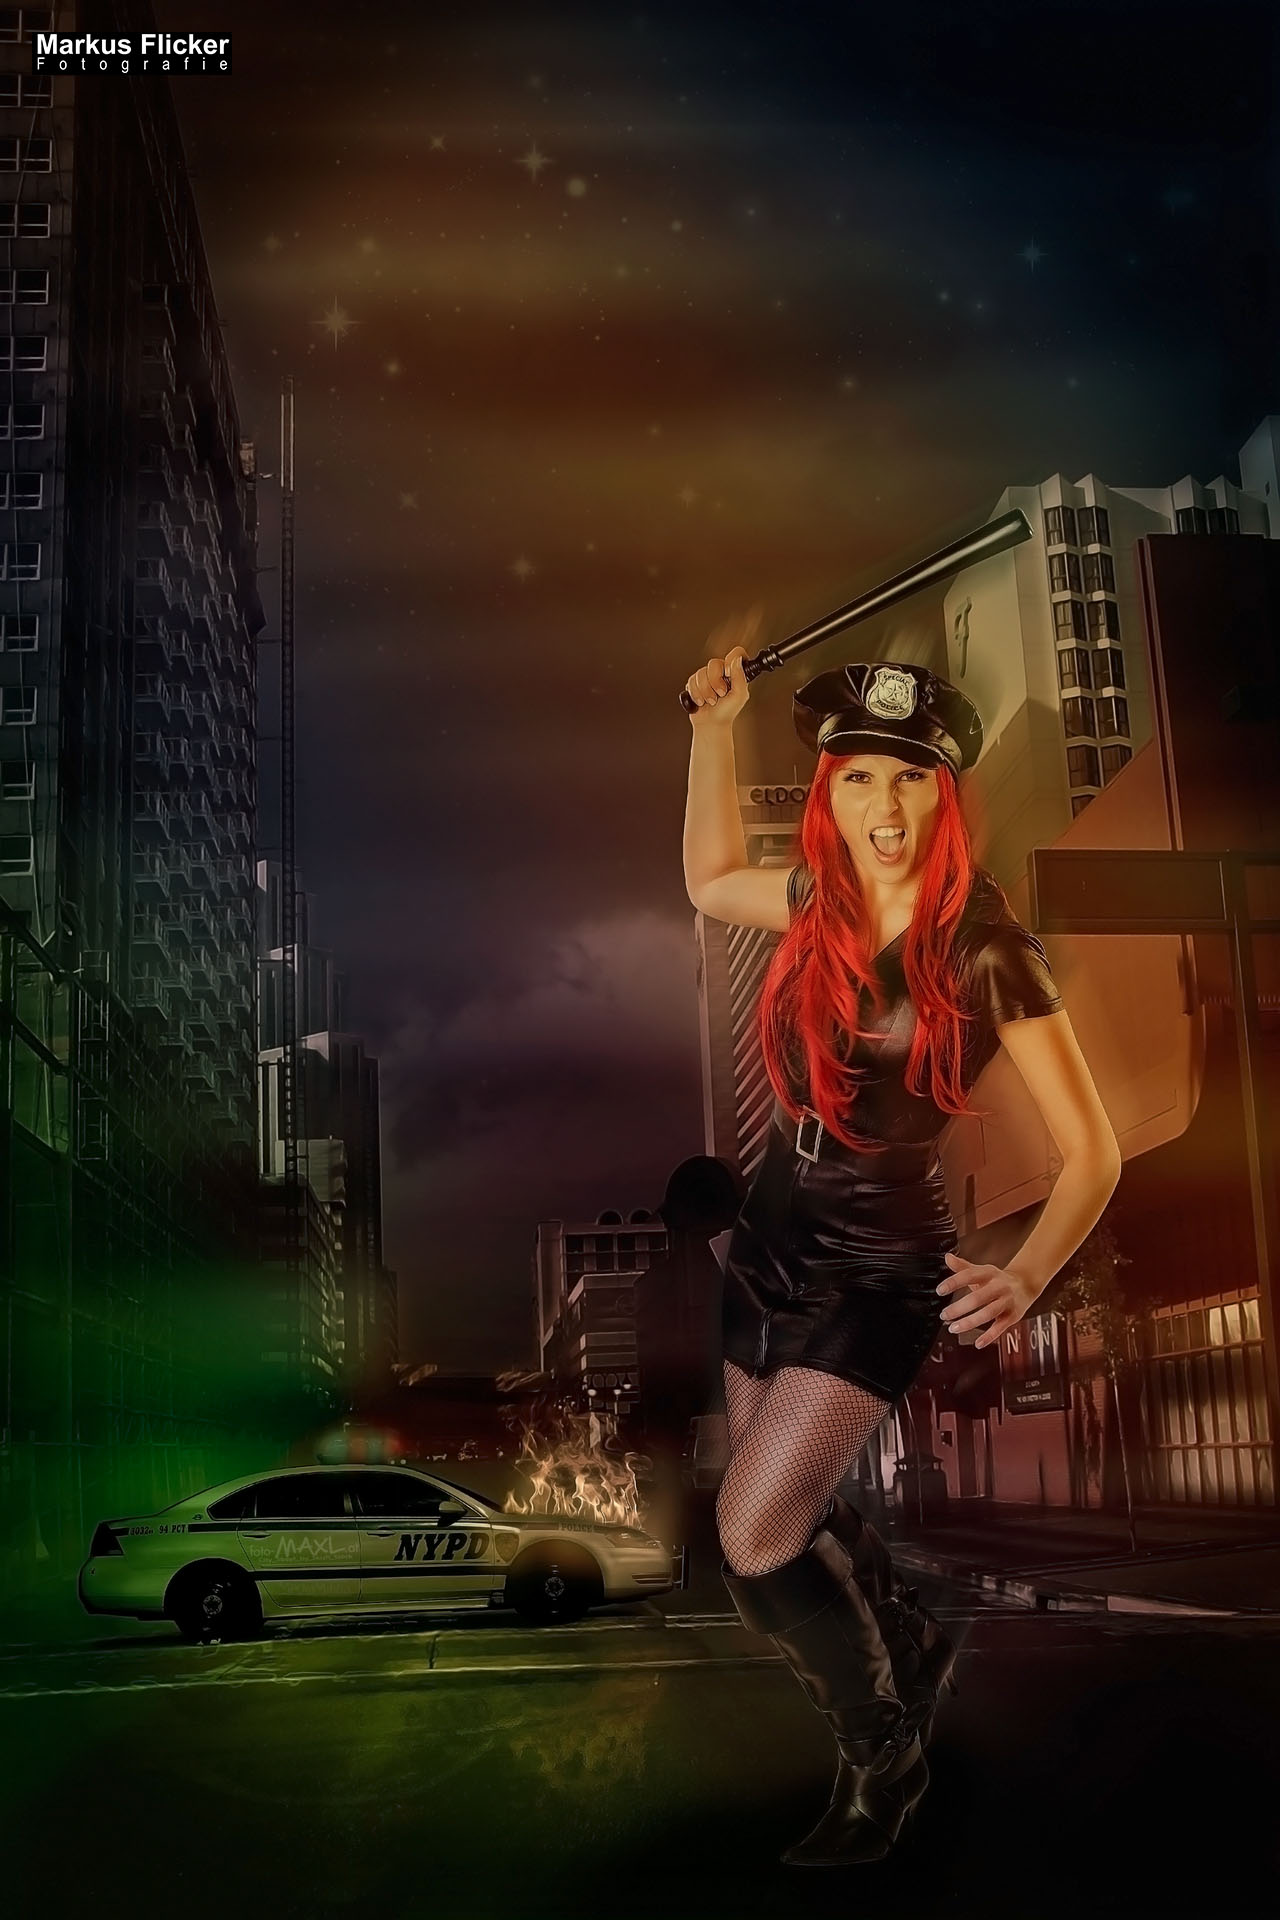 Female Police Officer Photoshop Compositing DigiArt Fantasy Halloween